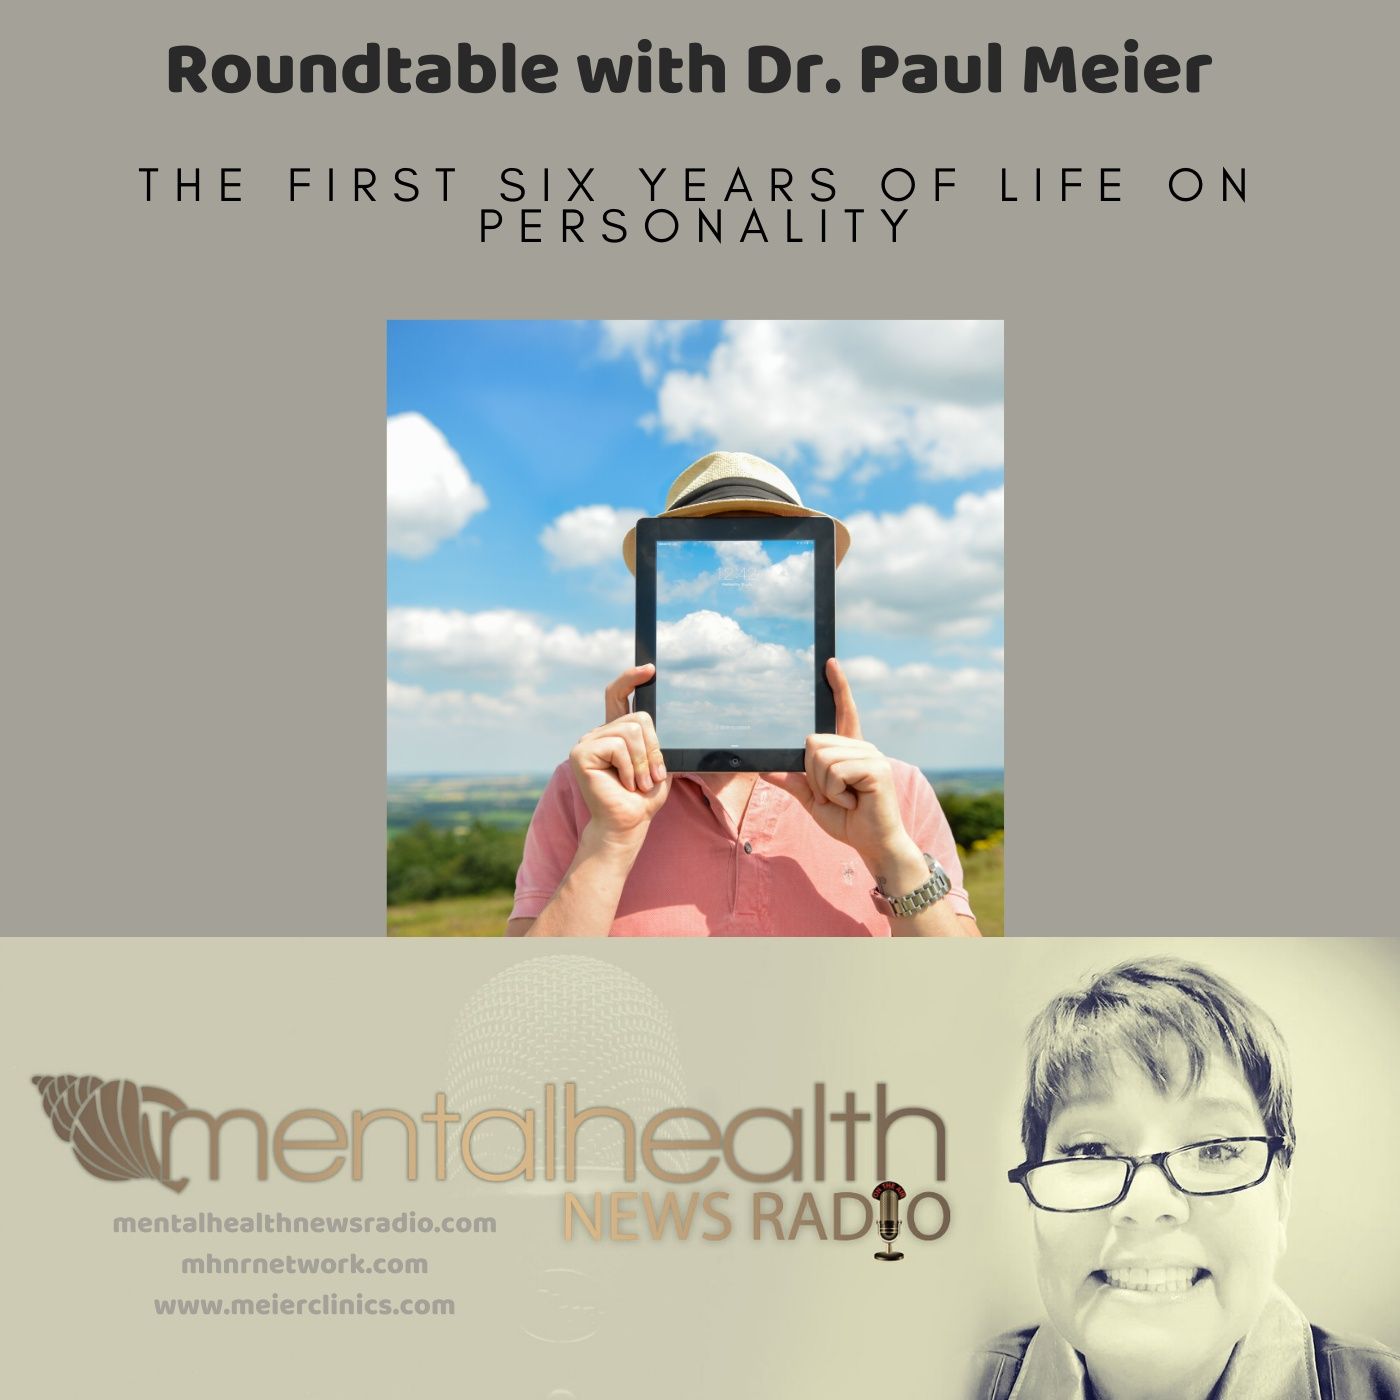 Mental Health News Radio - Roundtable with Dr. Paul Meier: The First Six Years of Life on Personality